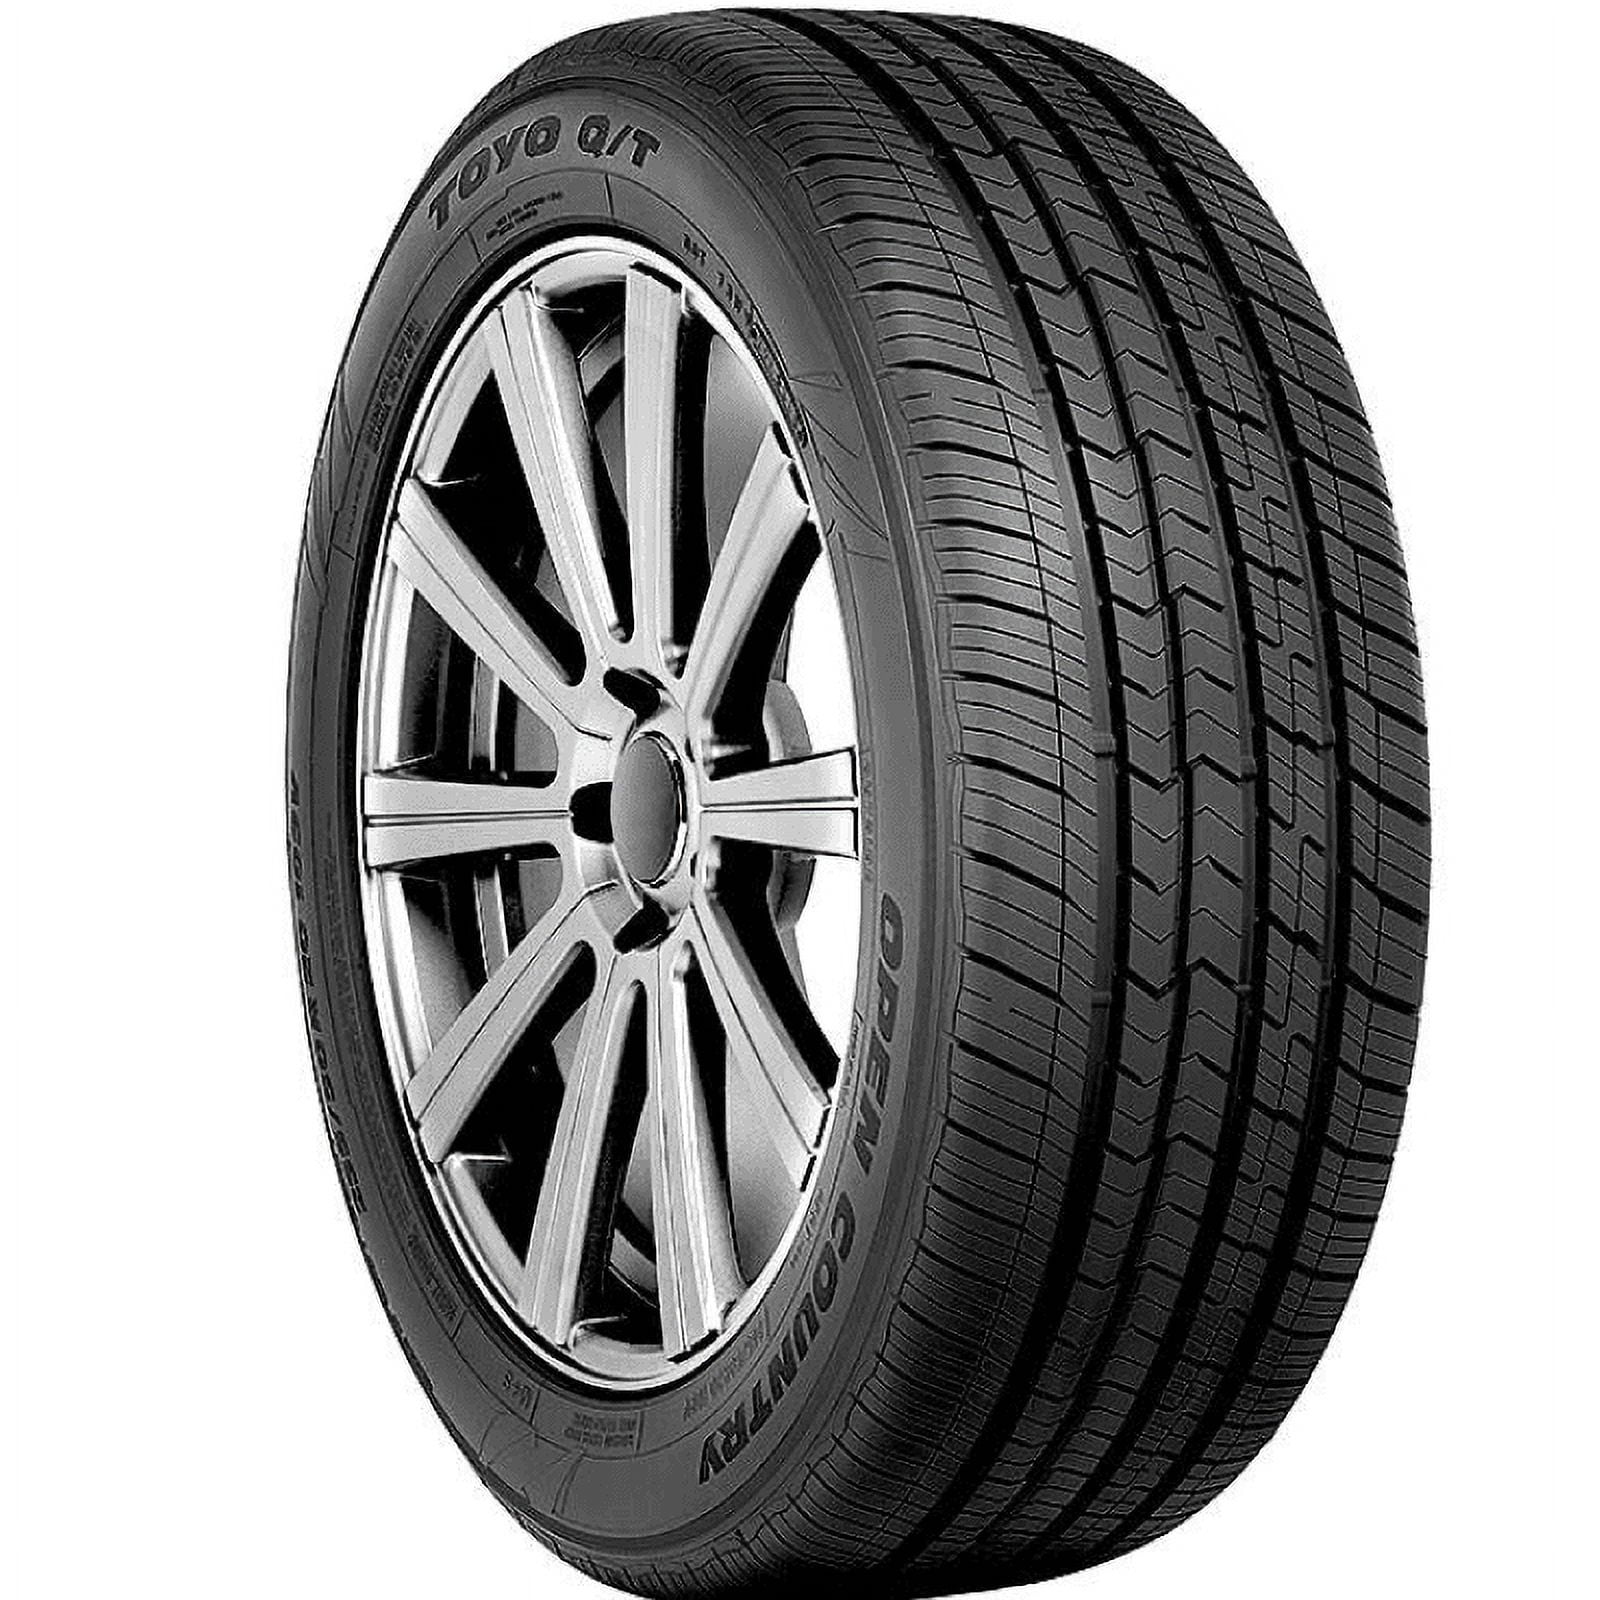 Toyo Open Country Q/T 265/65R17 110 S Tire Fits: 2005-15 Toyota Tacoma Pre  Runner